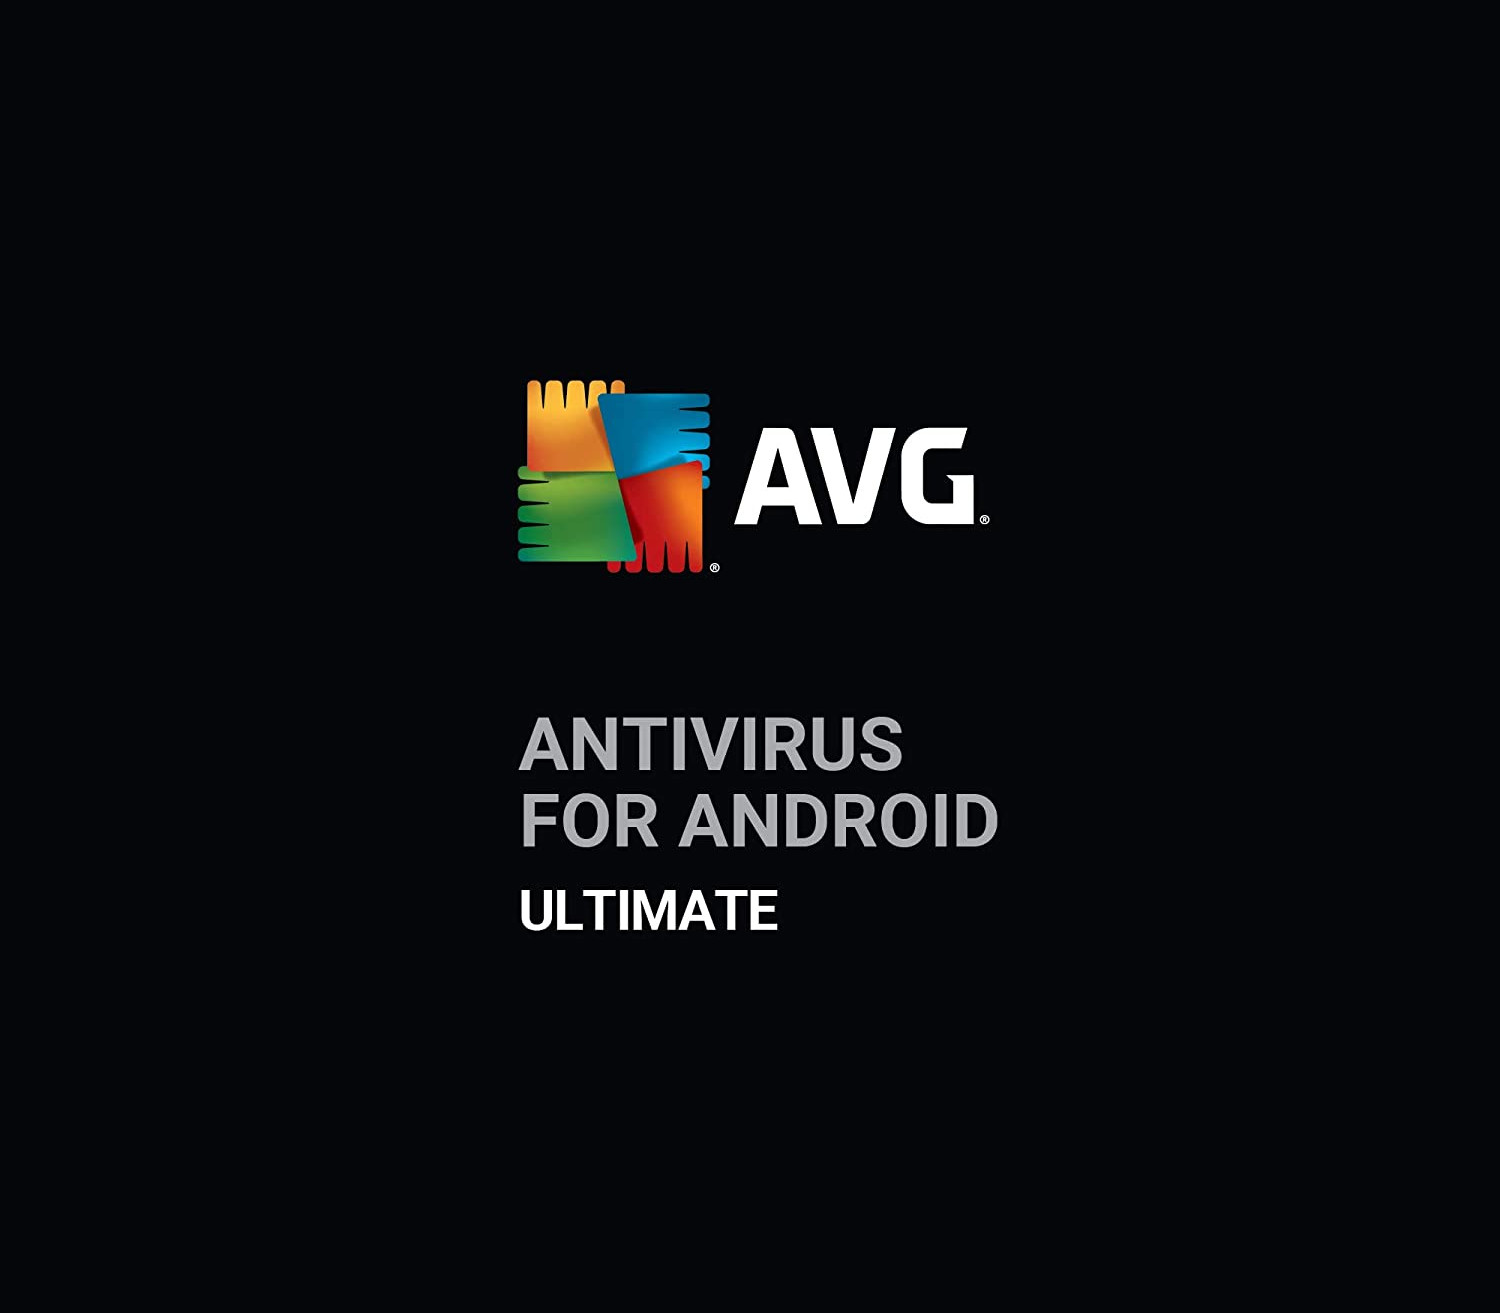 AVG Antivirus for Android - Ultimate Key (1 Year / 1 Device), 6.84$